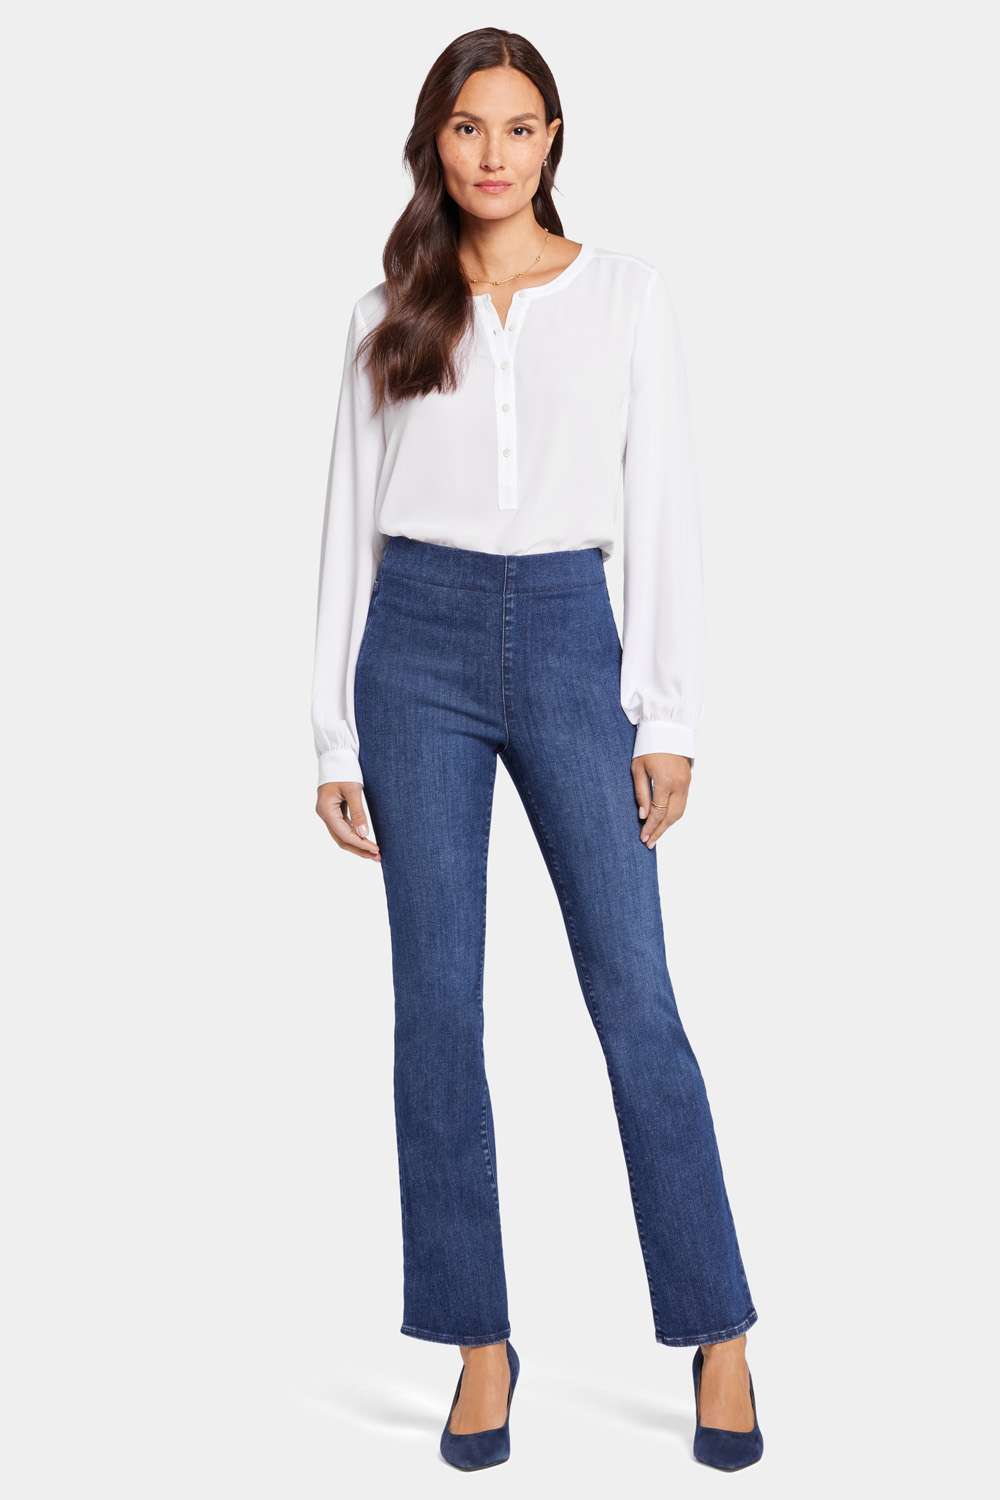 Women's Petite Slim Jeans - High-Rise, Ankled & Flared